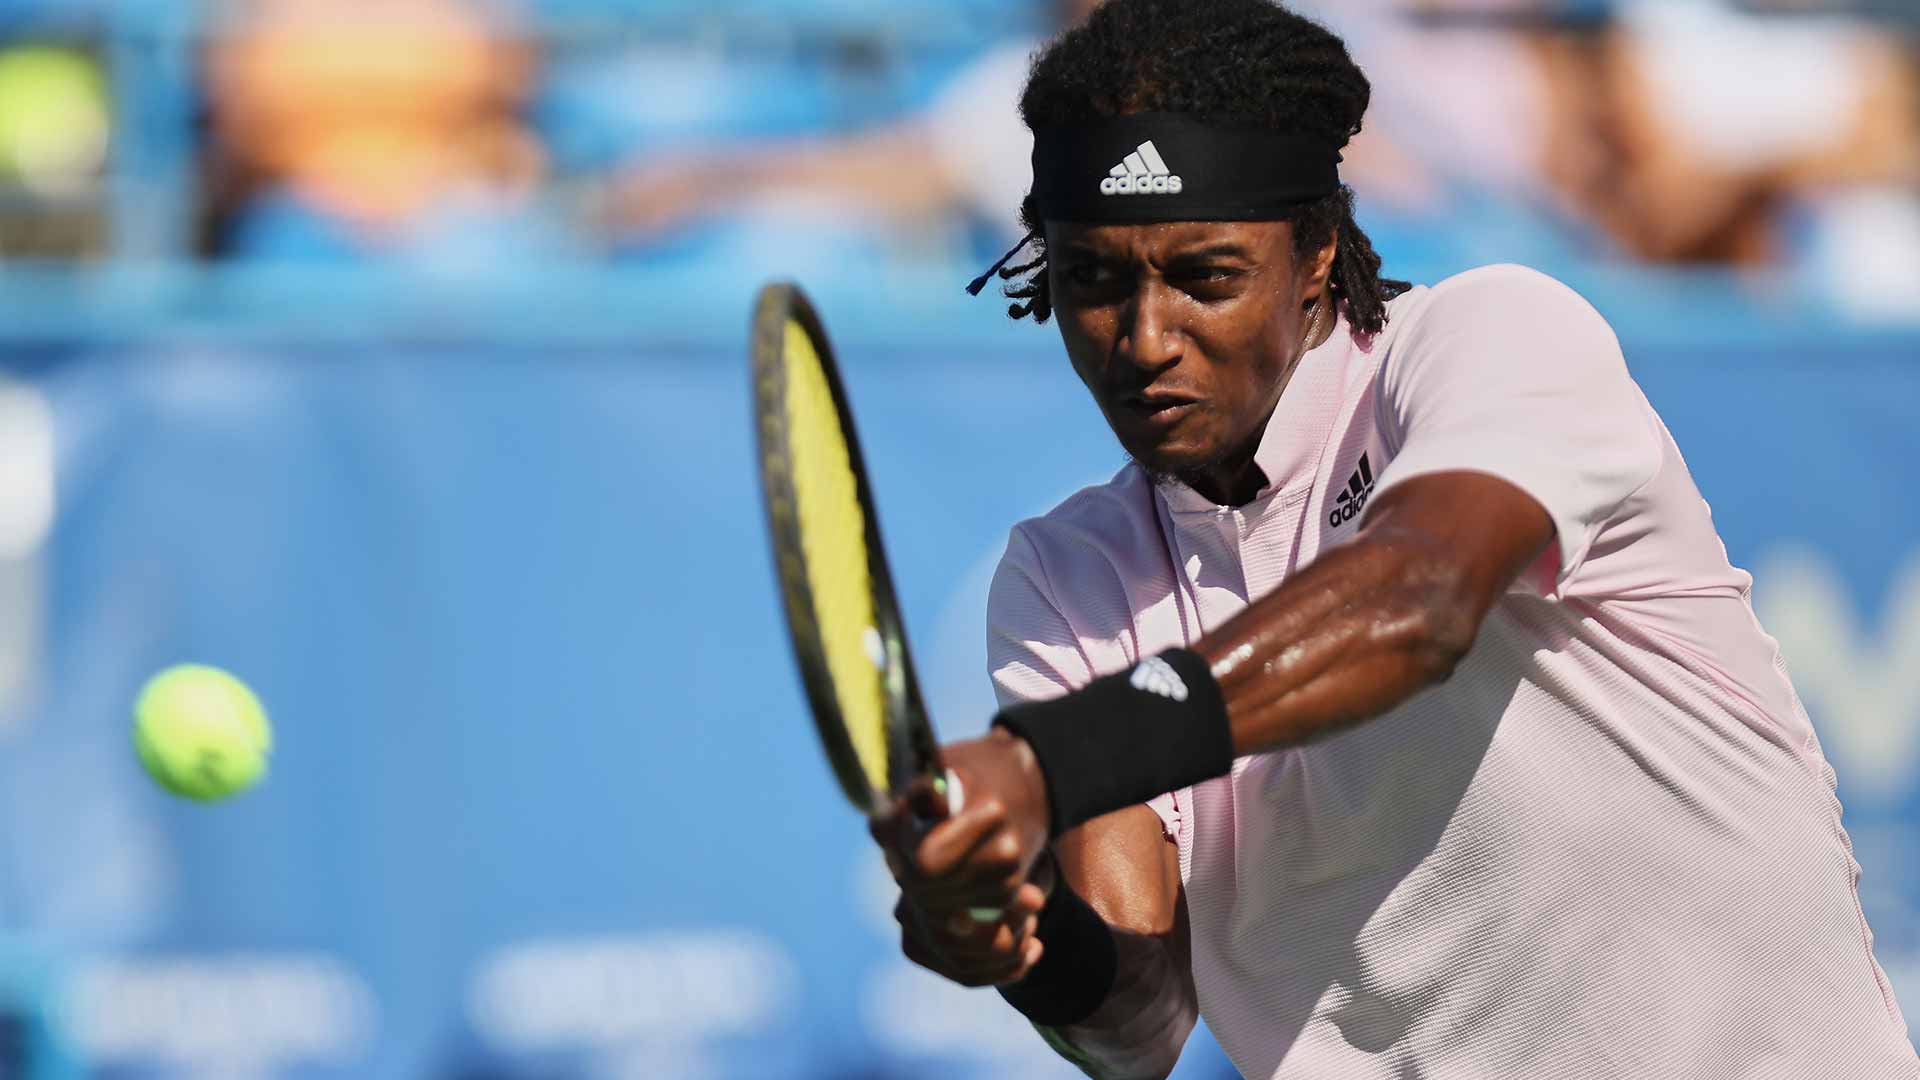 Mikael Ymer Battles Past Andy Murray In Washington ATP Tour Tennis